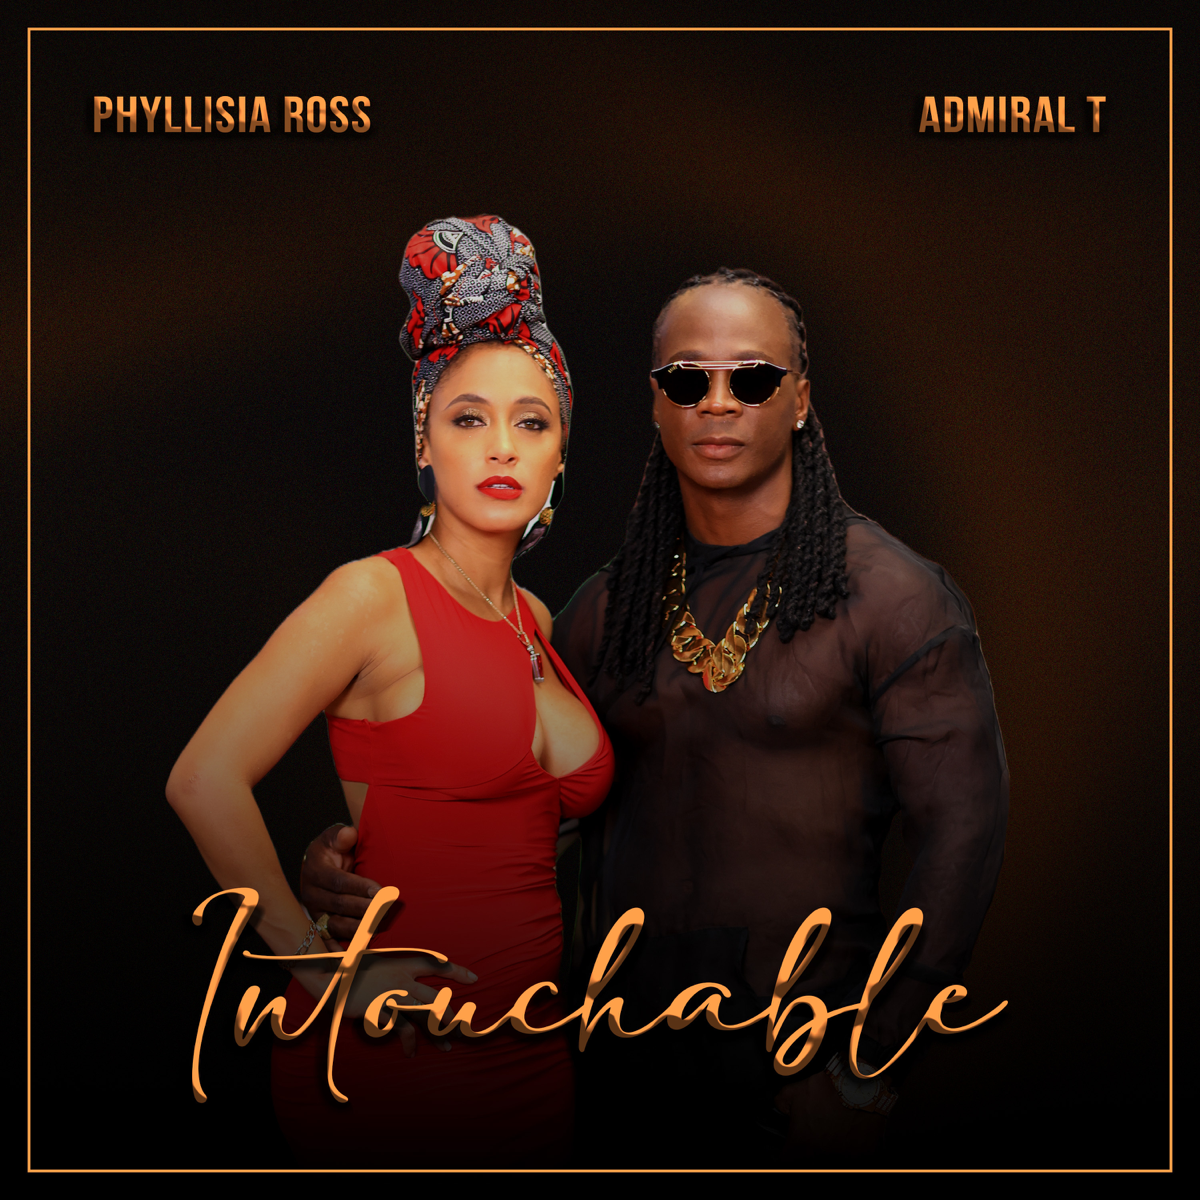 ﻿INTOUCHABLE FEAT PHYLISSIA ROSS